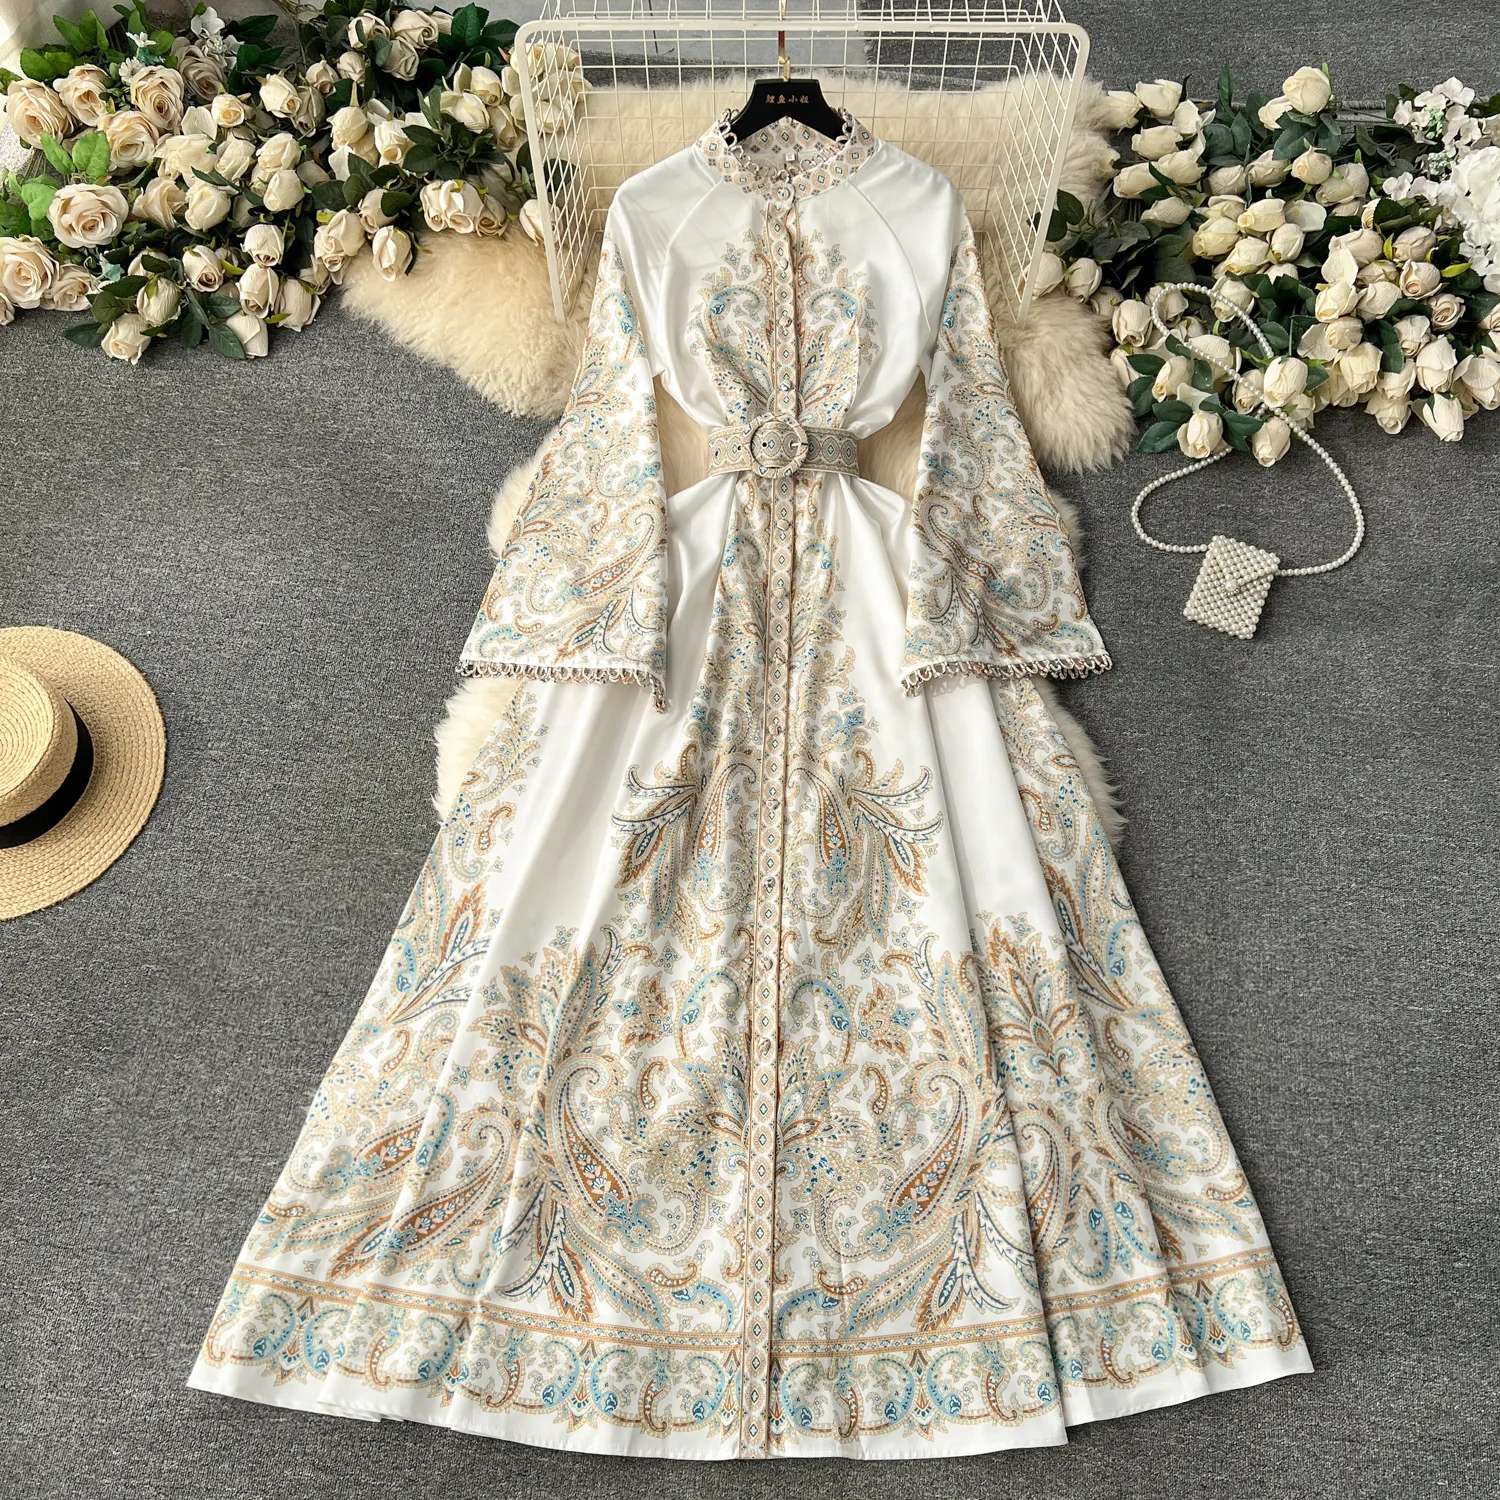 European retro palace style dress for women with design sense, printed flared sleeves, slim fit, long and elegant dress, spring dress for women